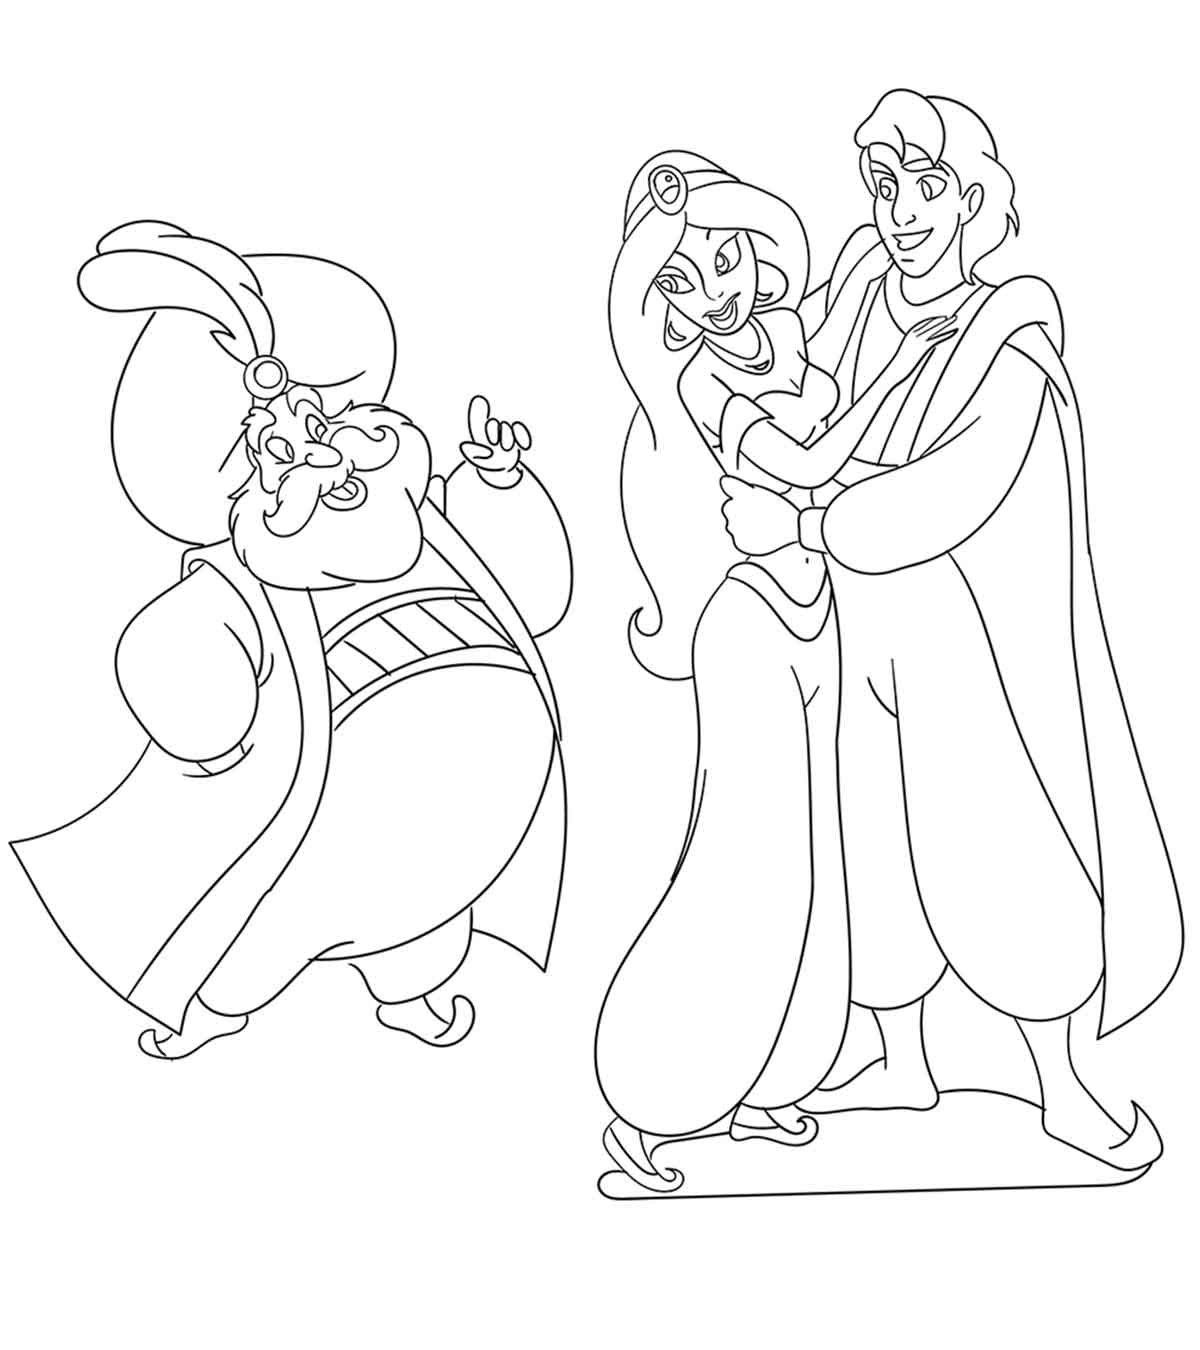 Download Disney Coloring Pages - MomJunction